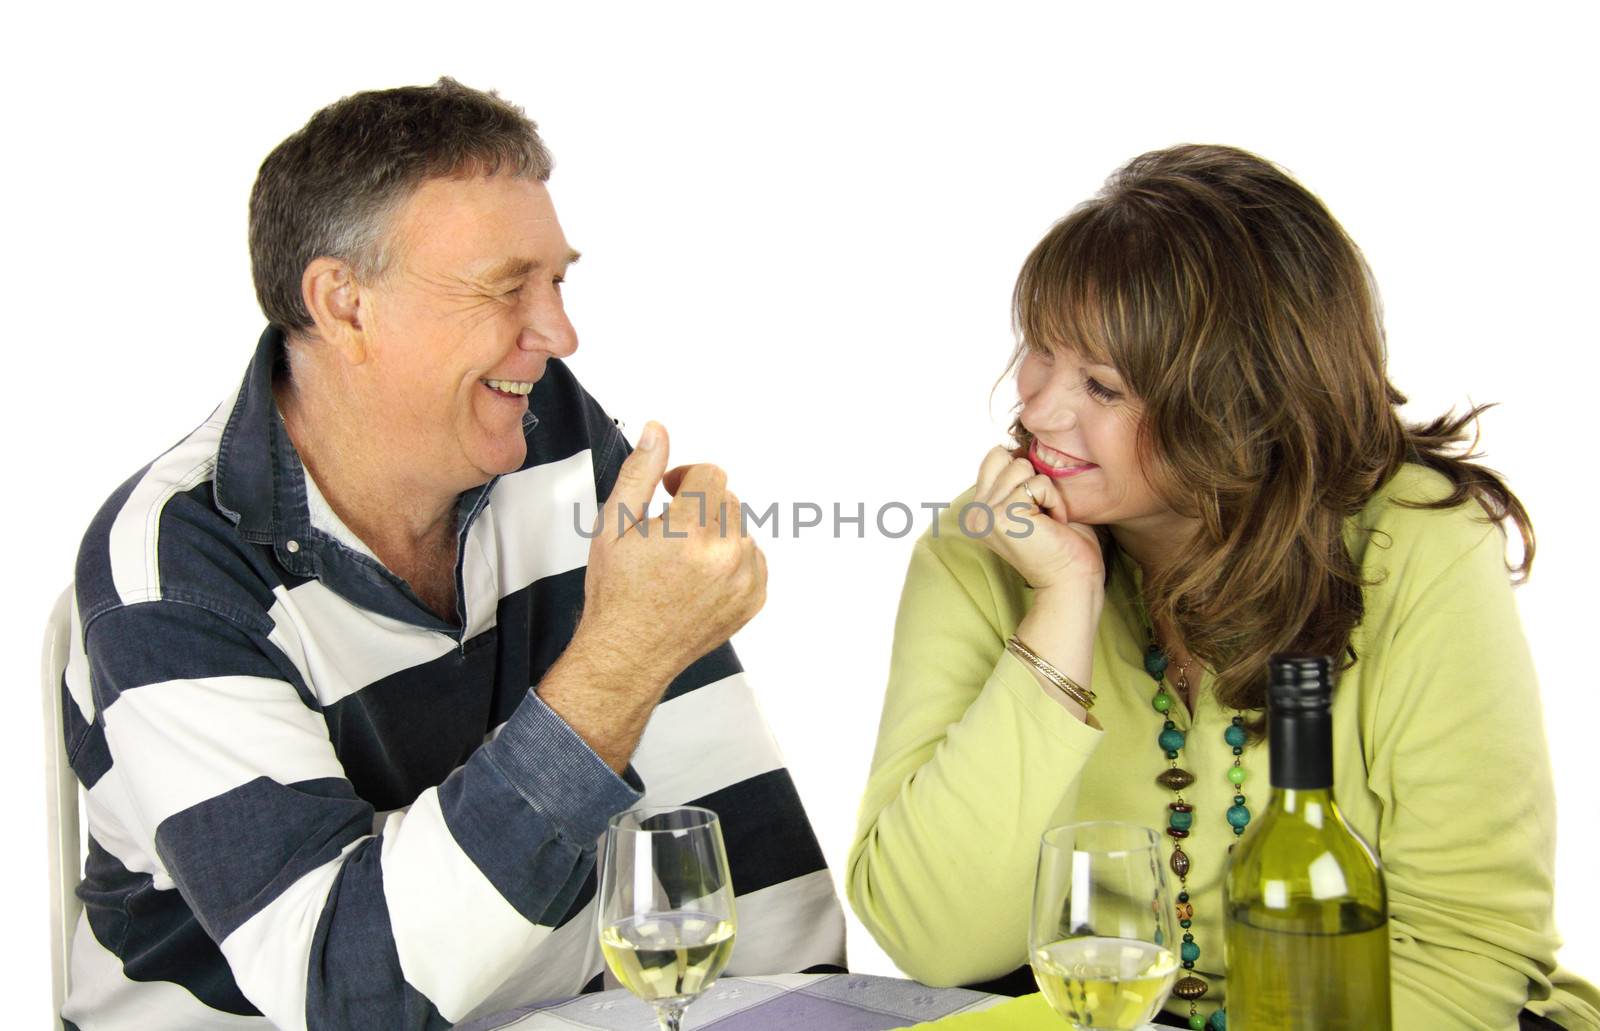 Middle aged couple having a conversation over lunch.